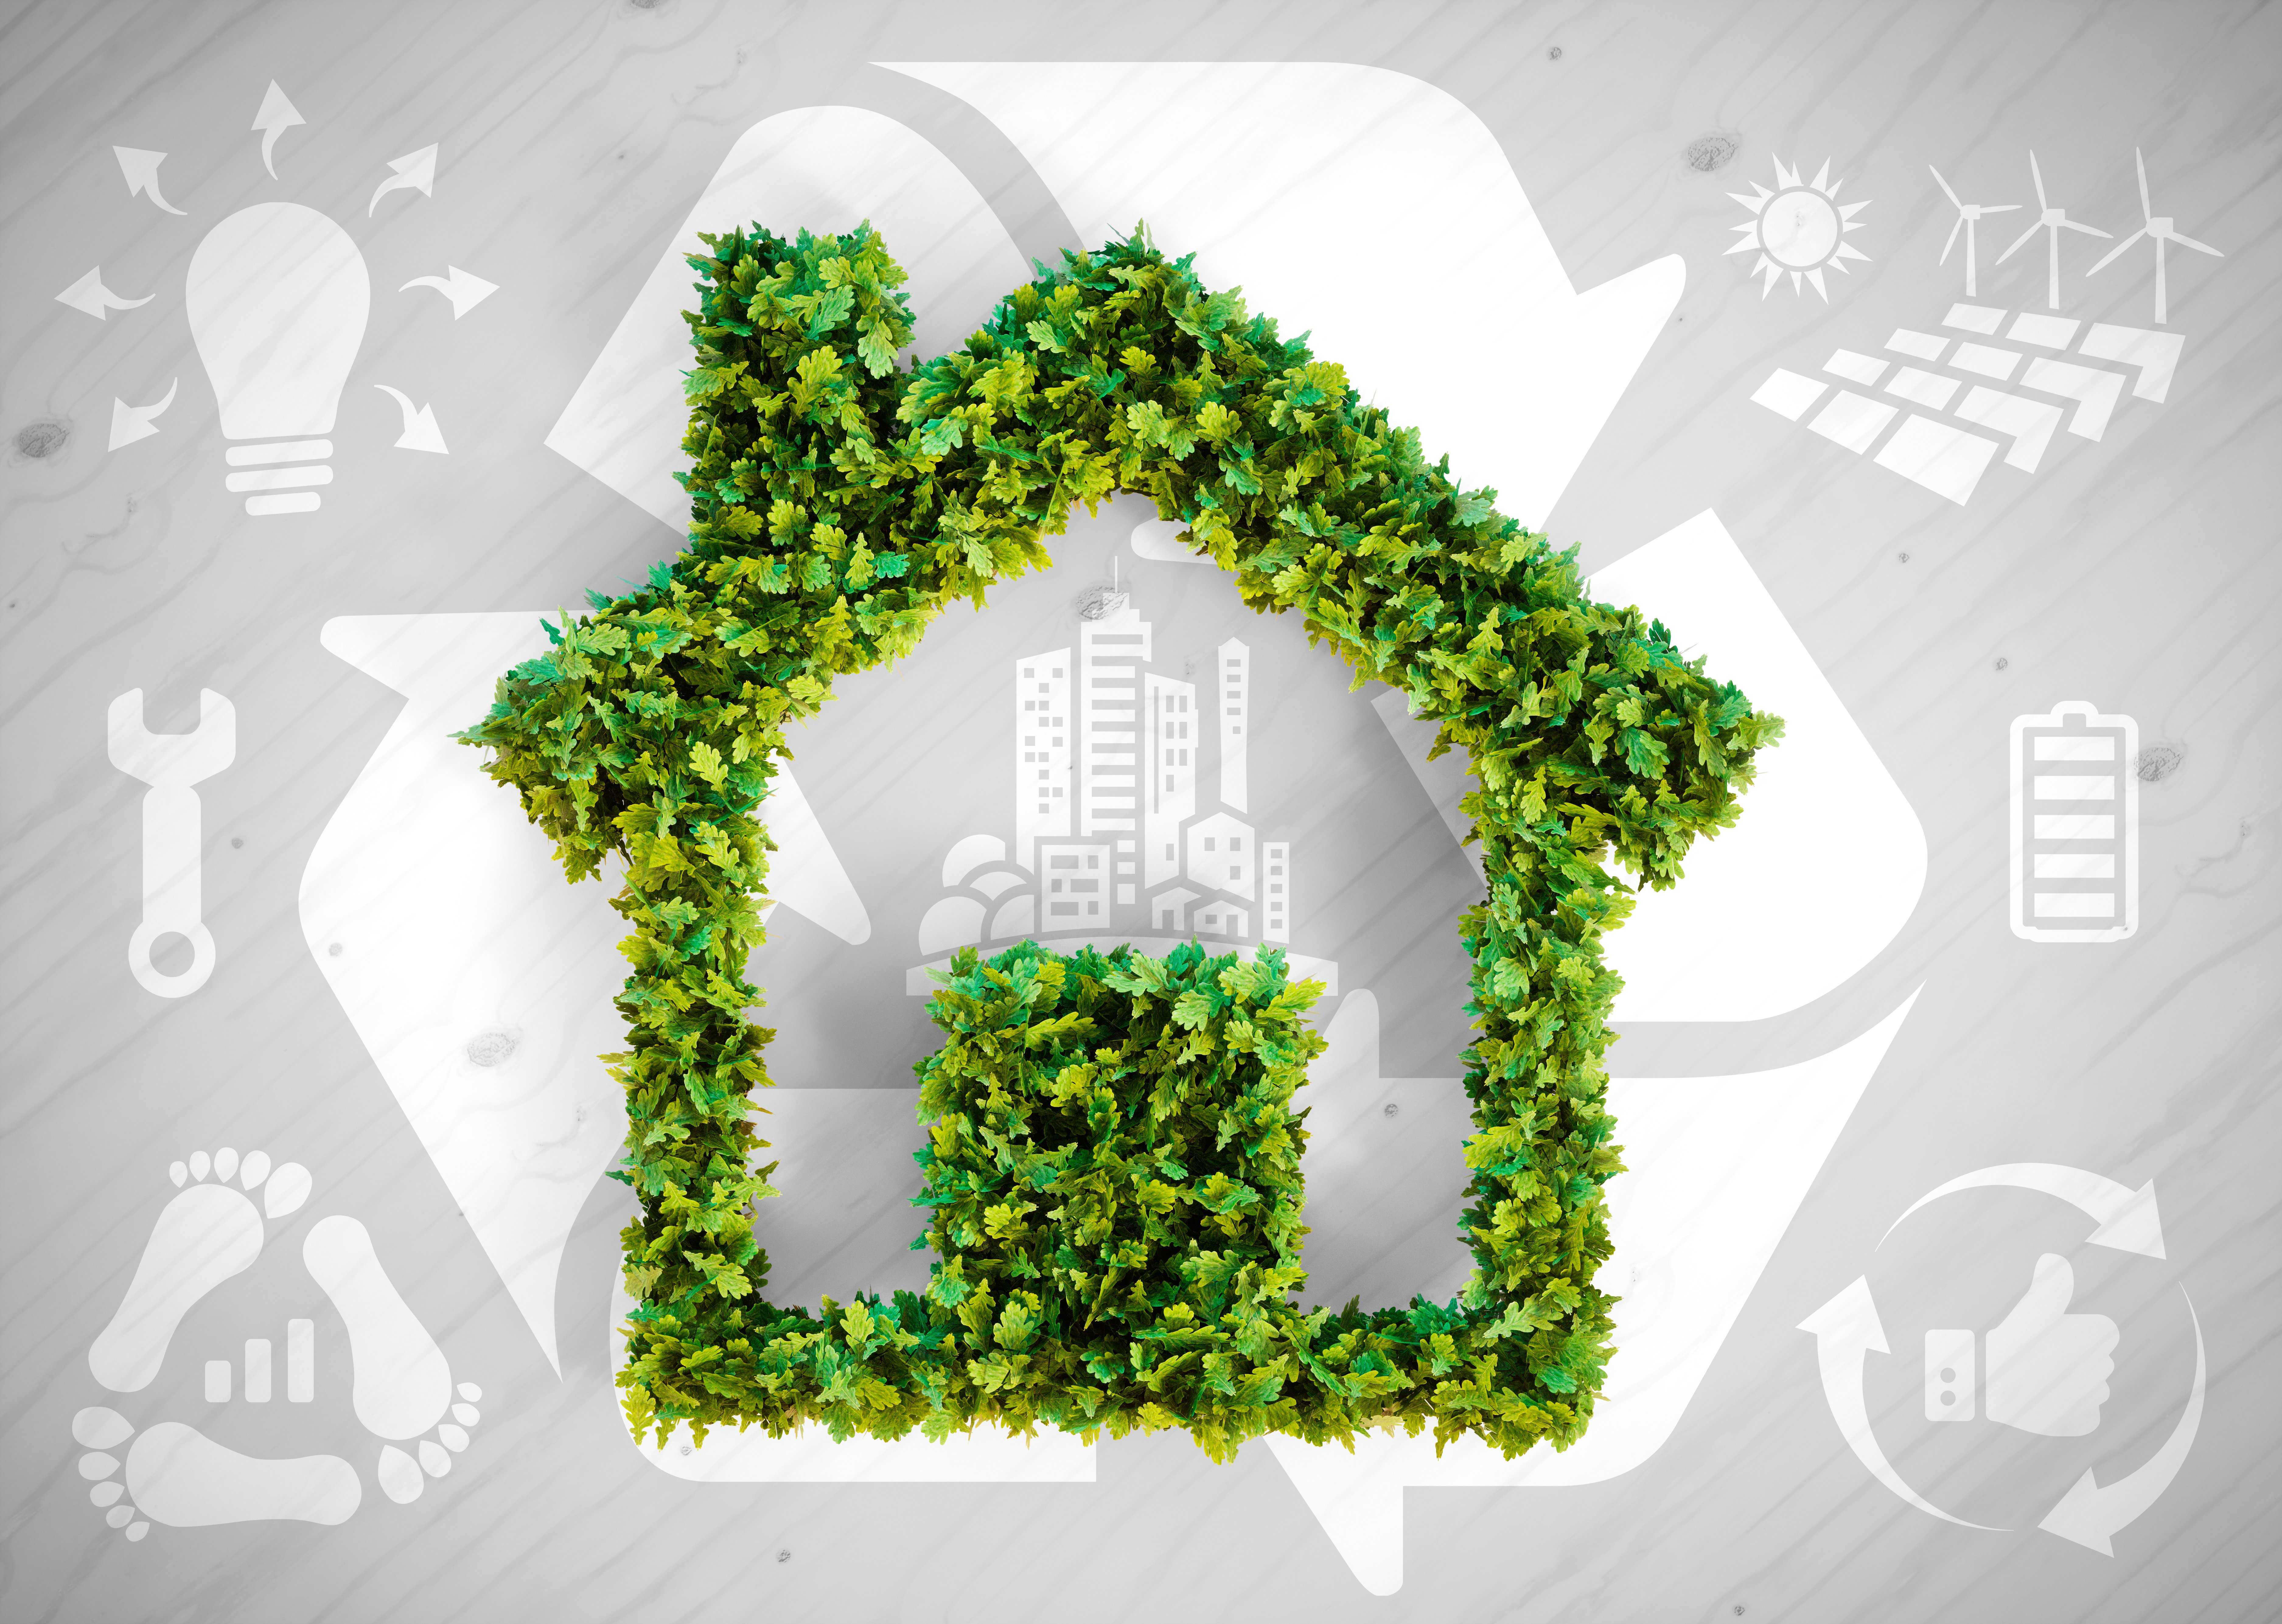 LEED - Green Building Initiatives: Saving the Planet and Money for Your HOA